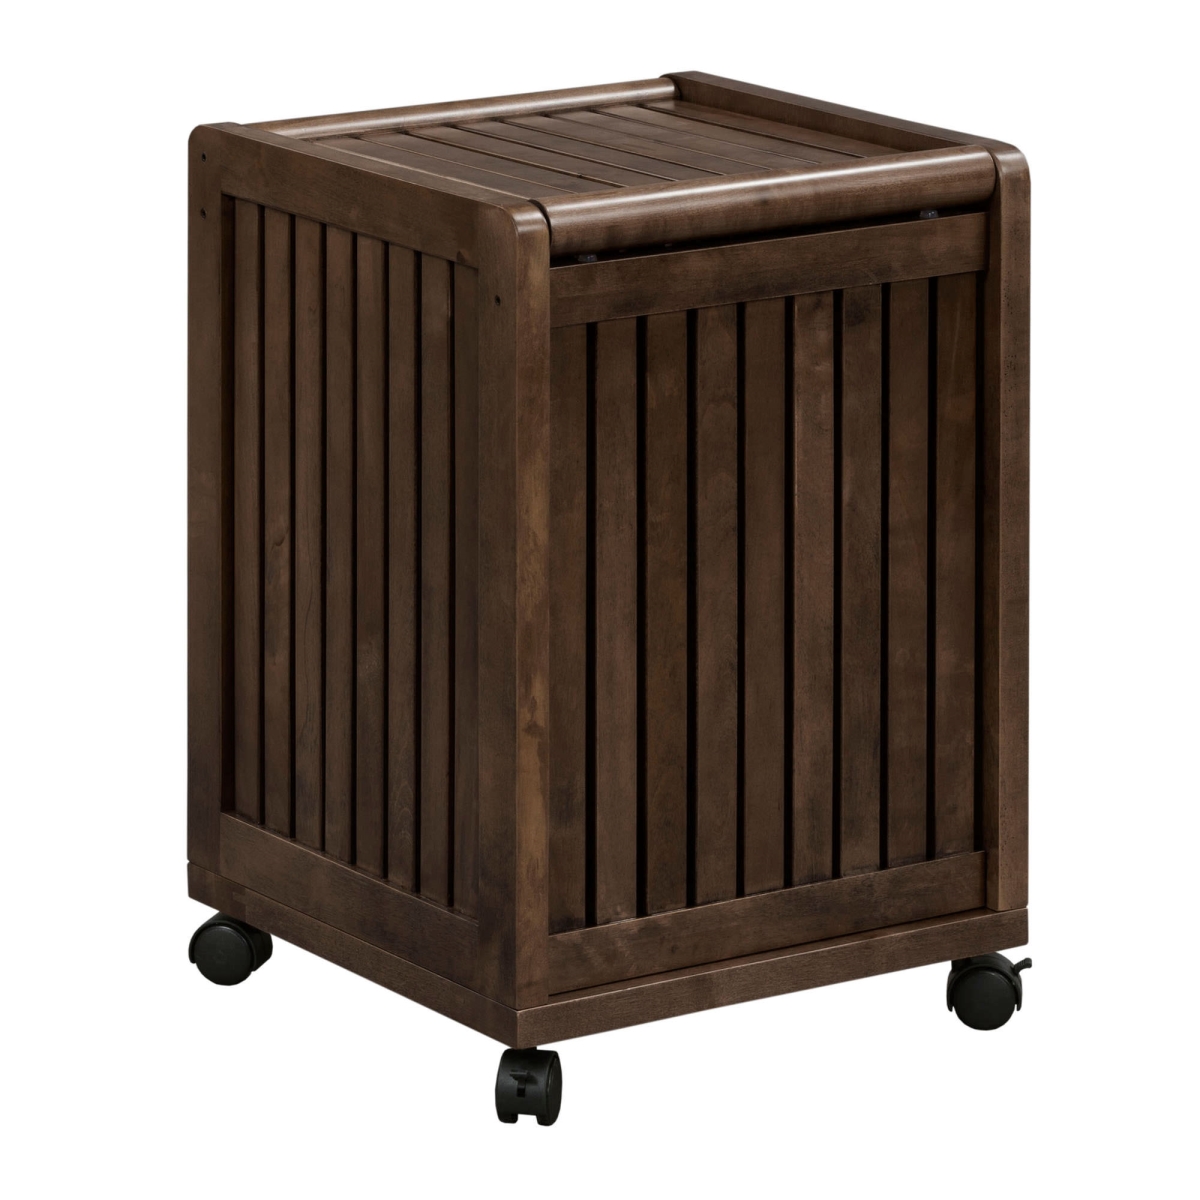 Picture of NewRidge Home Goods 2214-ESP Home Solid Wood Abingdon Mobile Rolling Multiple Colors Laundry Hamper with Lid